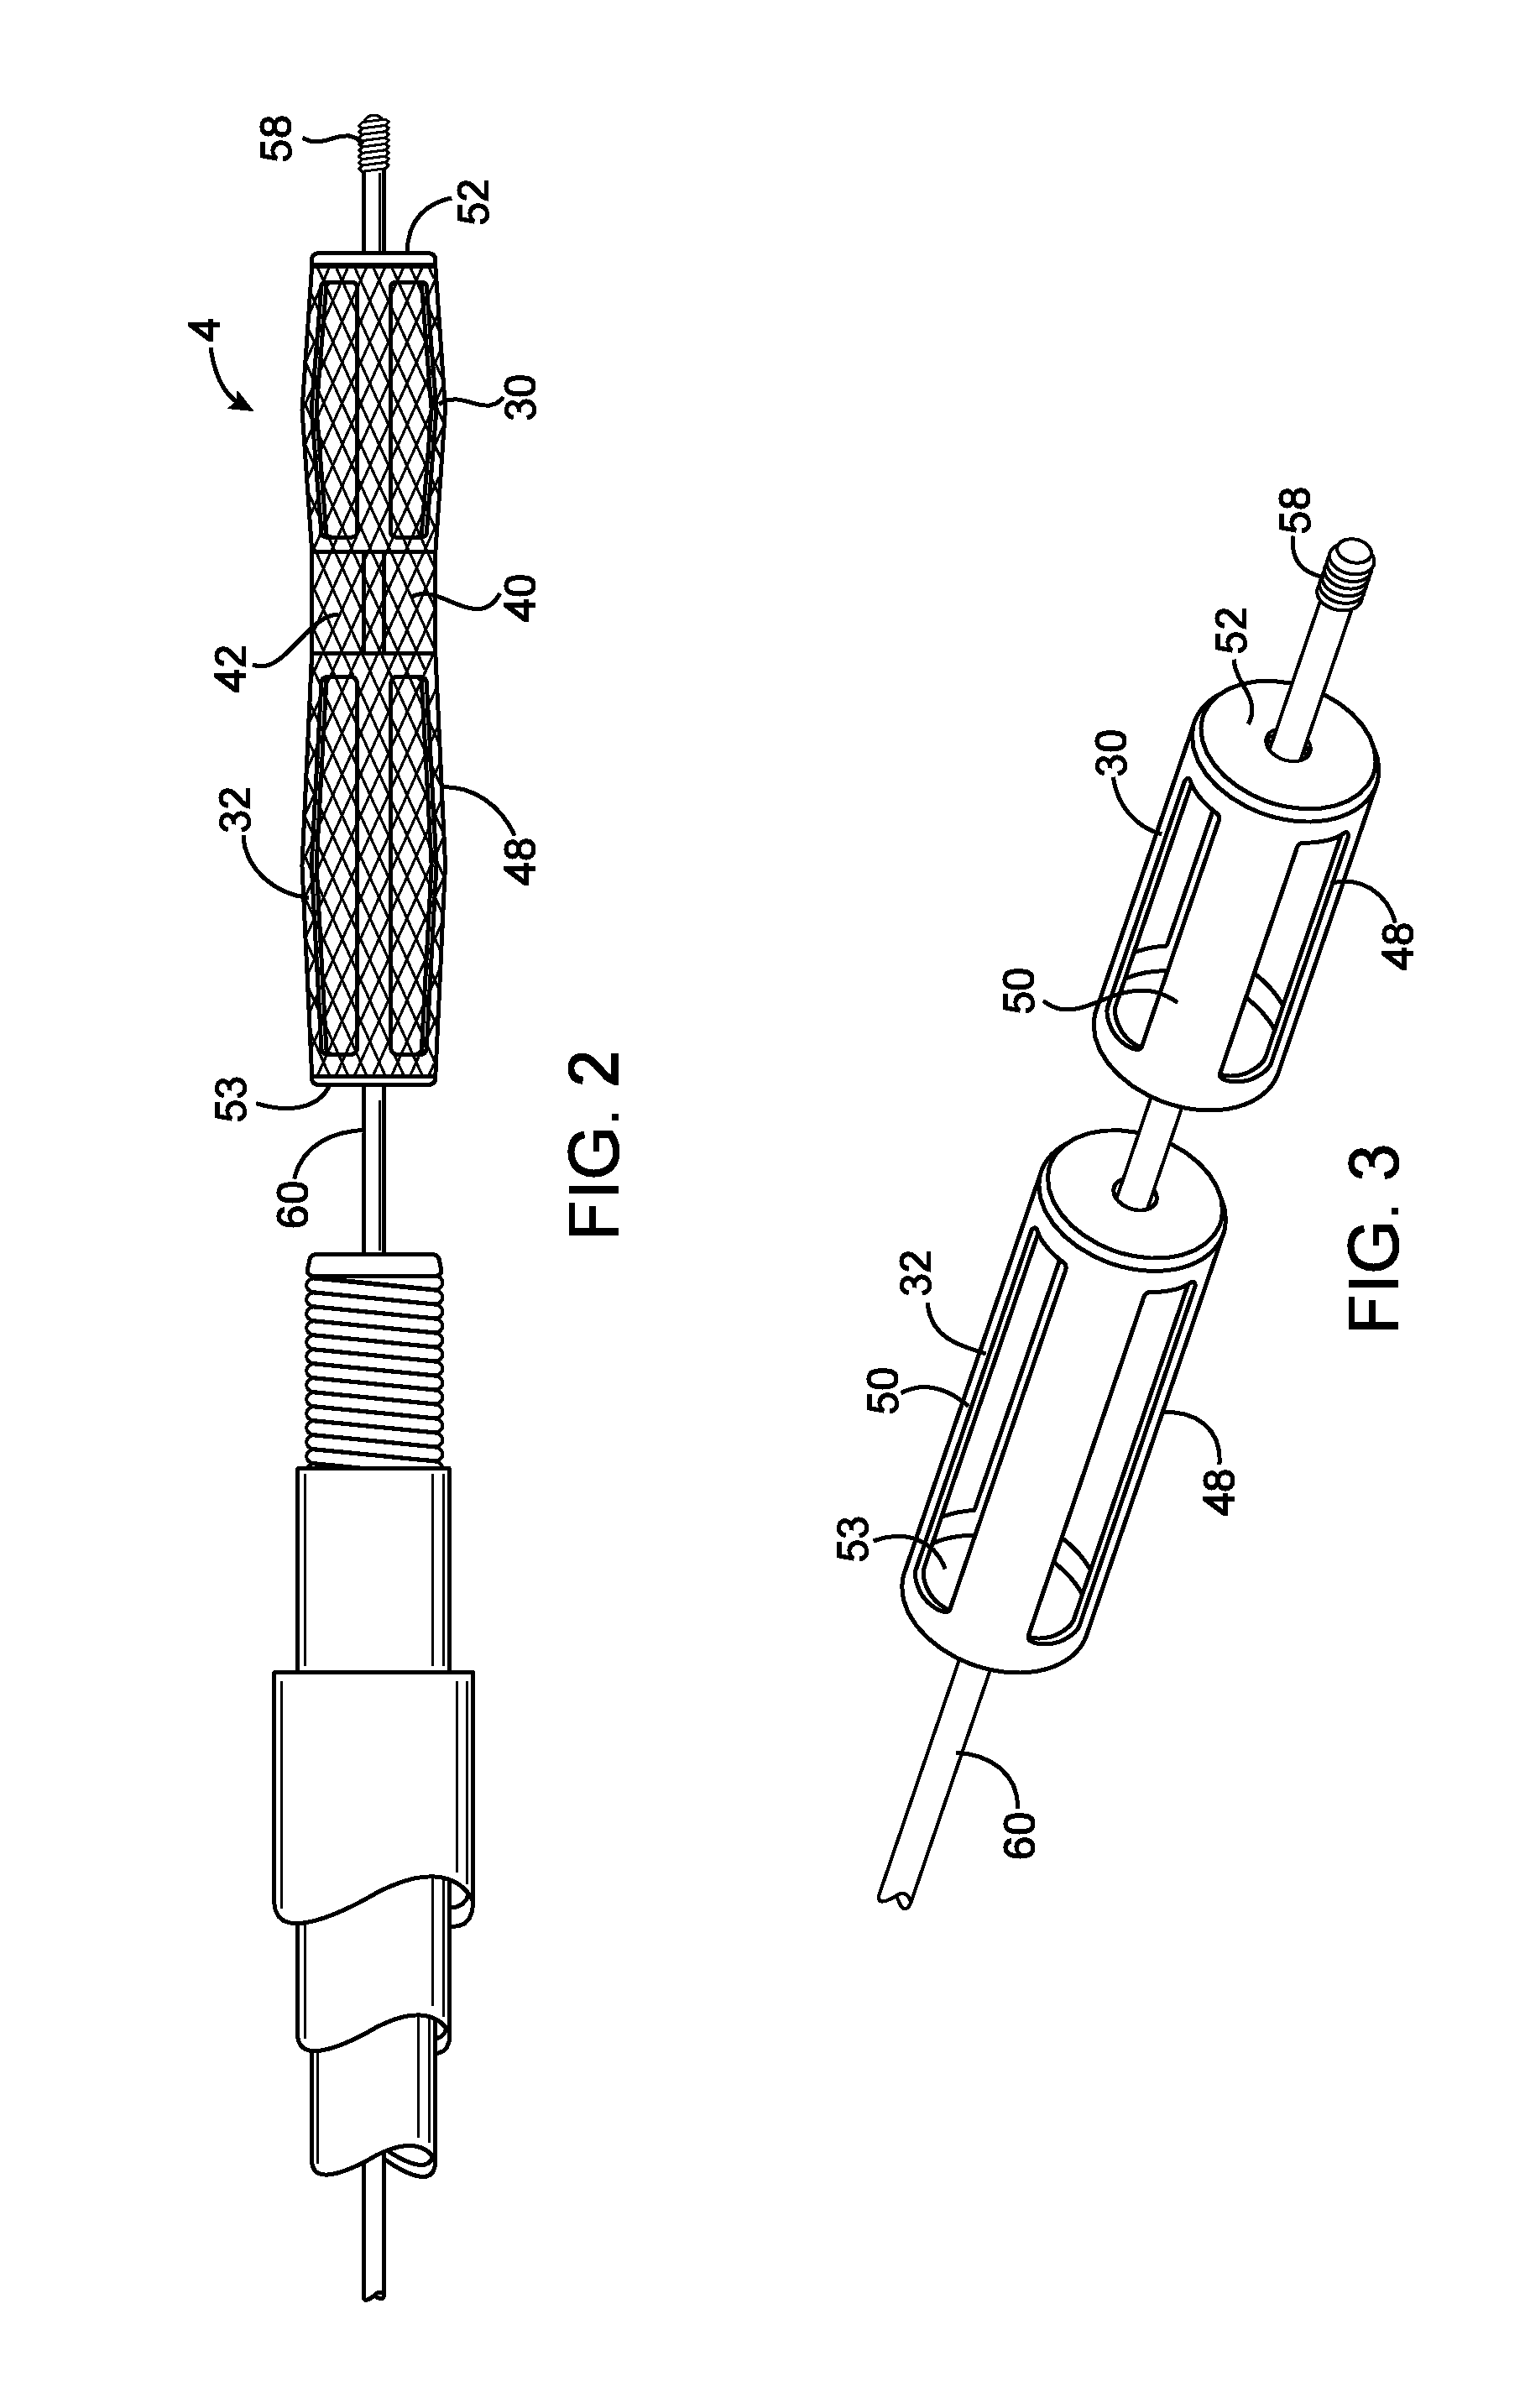 Devices and methods for treating vascular malformations